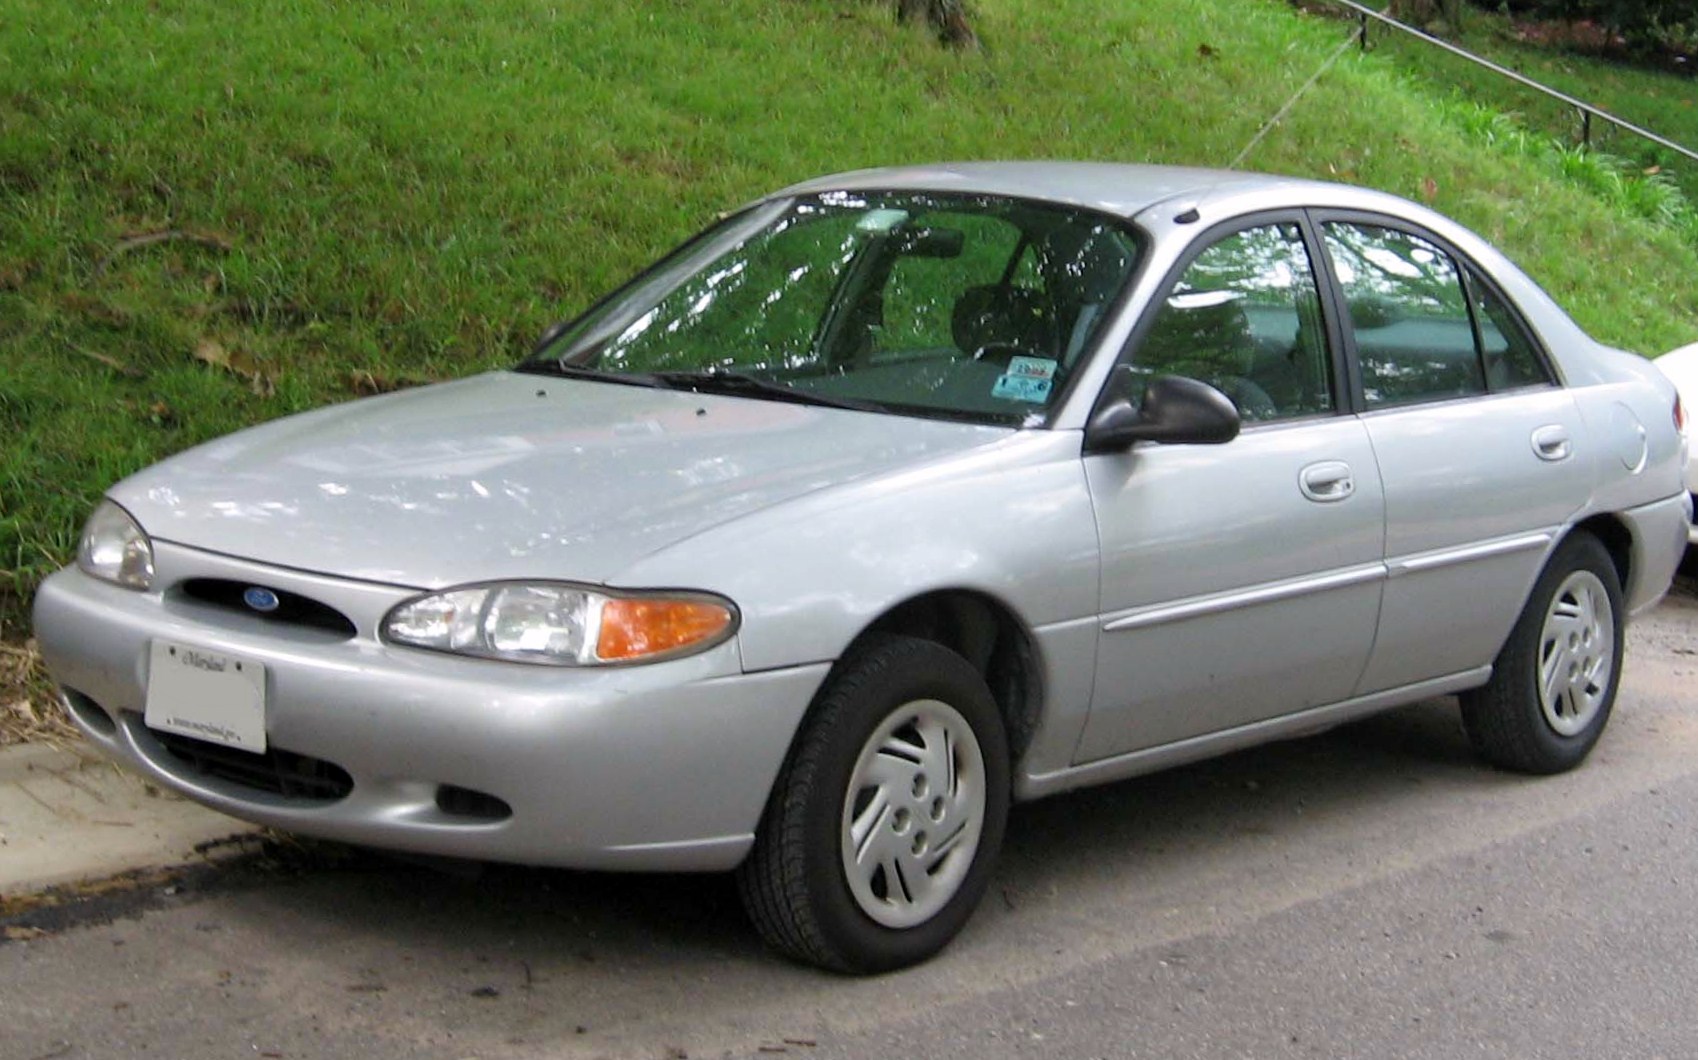 a Picture of a grey 97 Ford Escort sedan.